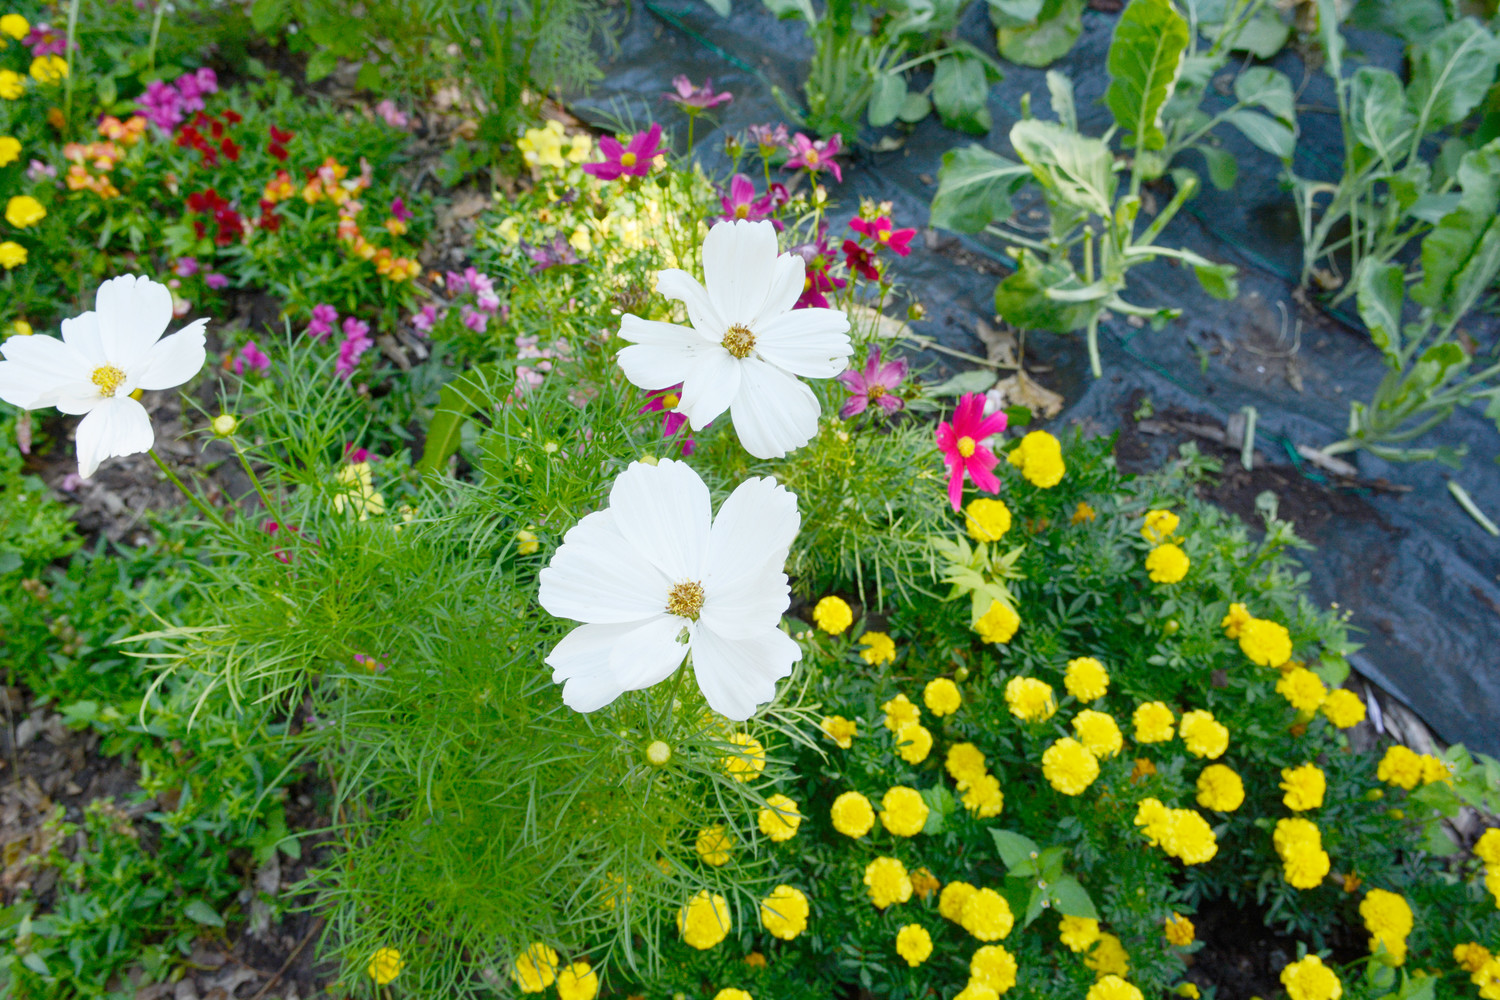 The Food for Others Garden is home to flowers such as white cosmos and yellow marigolds.